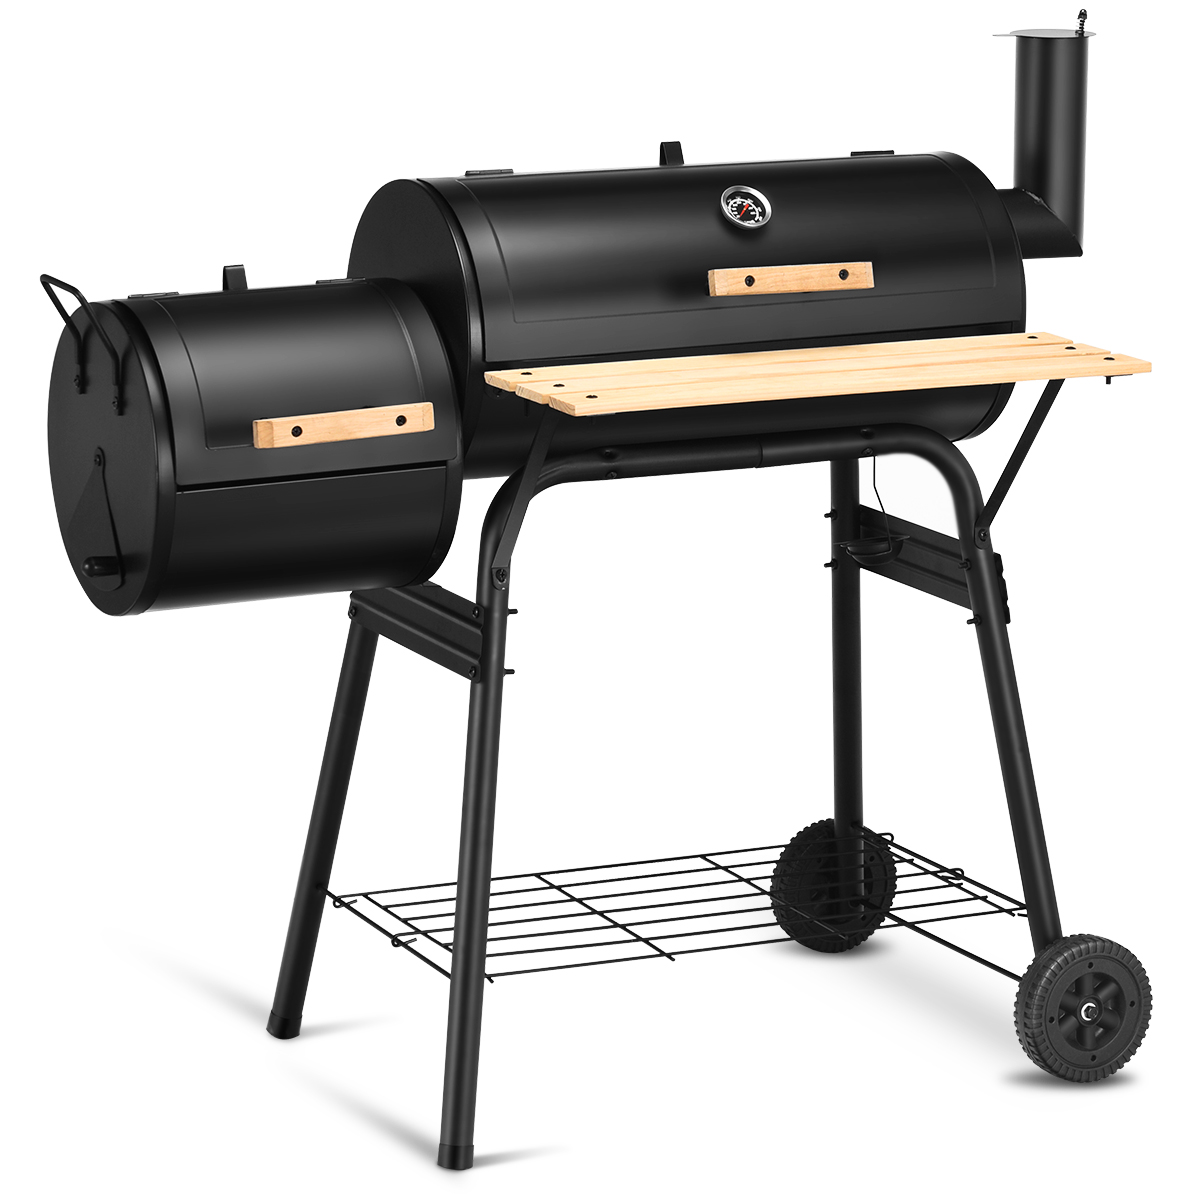 Costway Outdoor BBQ Grill Charcoal Barbecue Pit Patio Backyard Meat Cooker Smoker - image 1 of 10